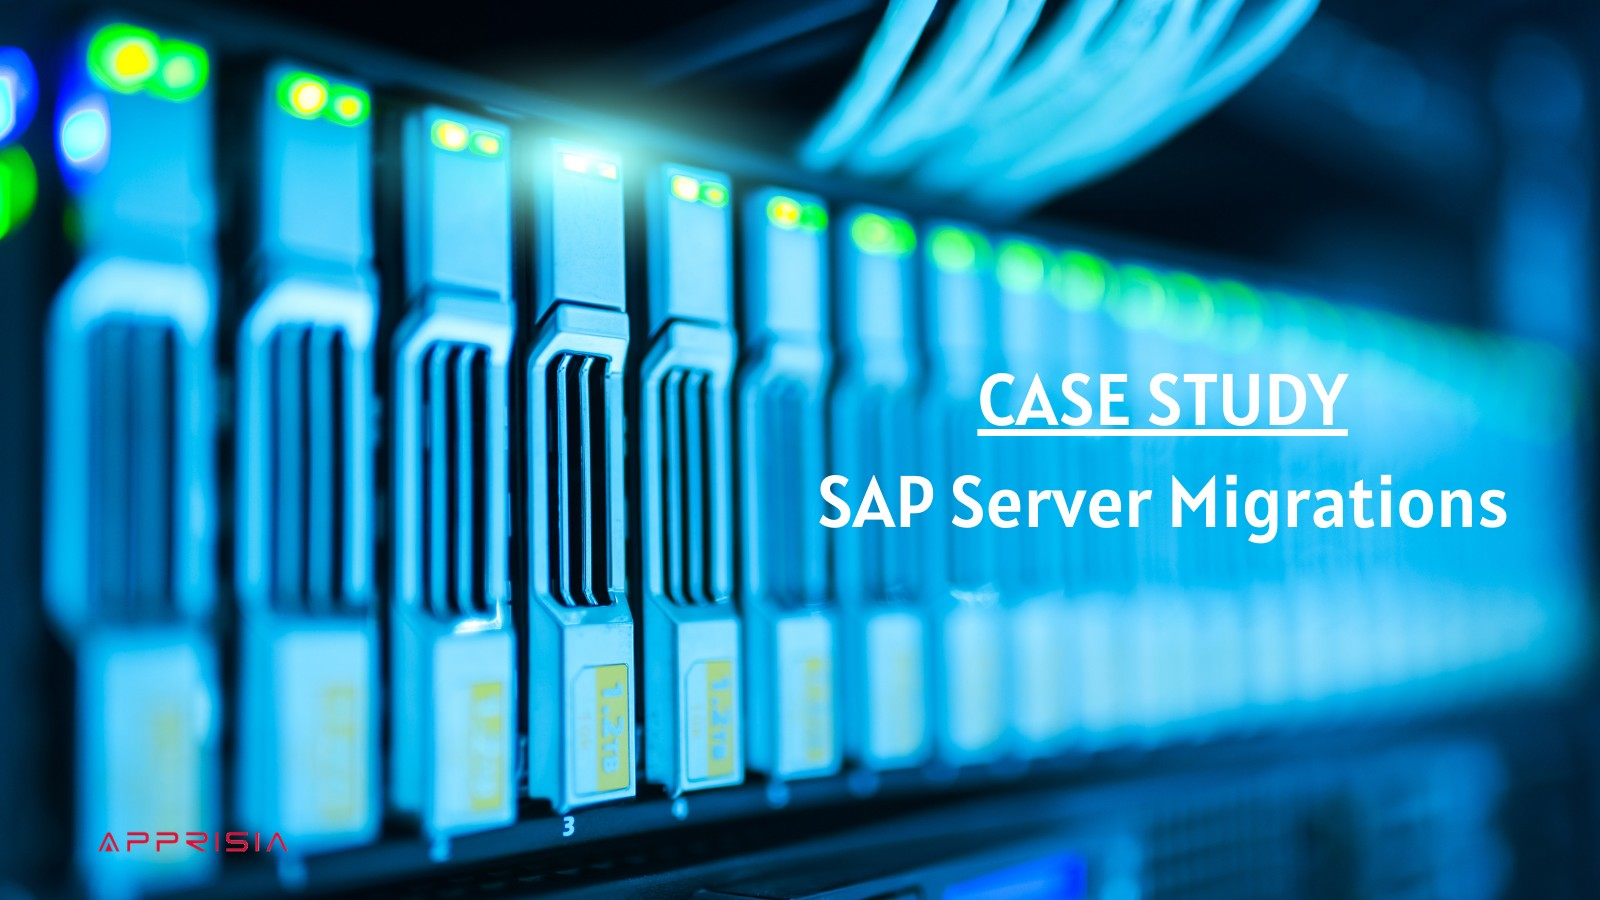 Case Study Report on Migration of SAP servers to Azure